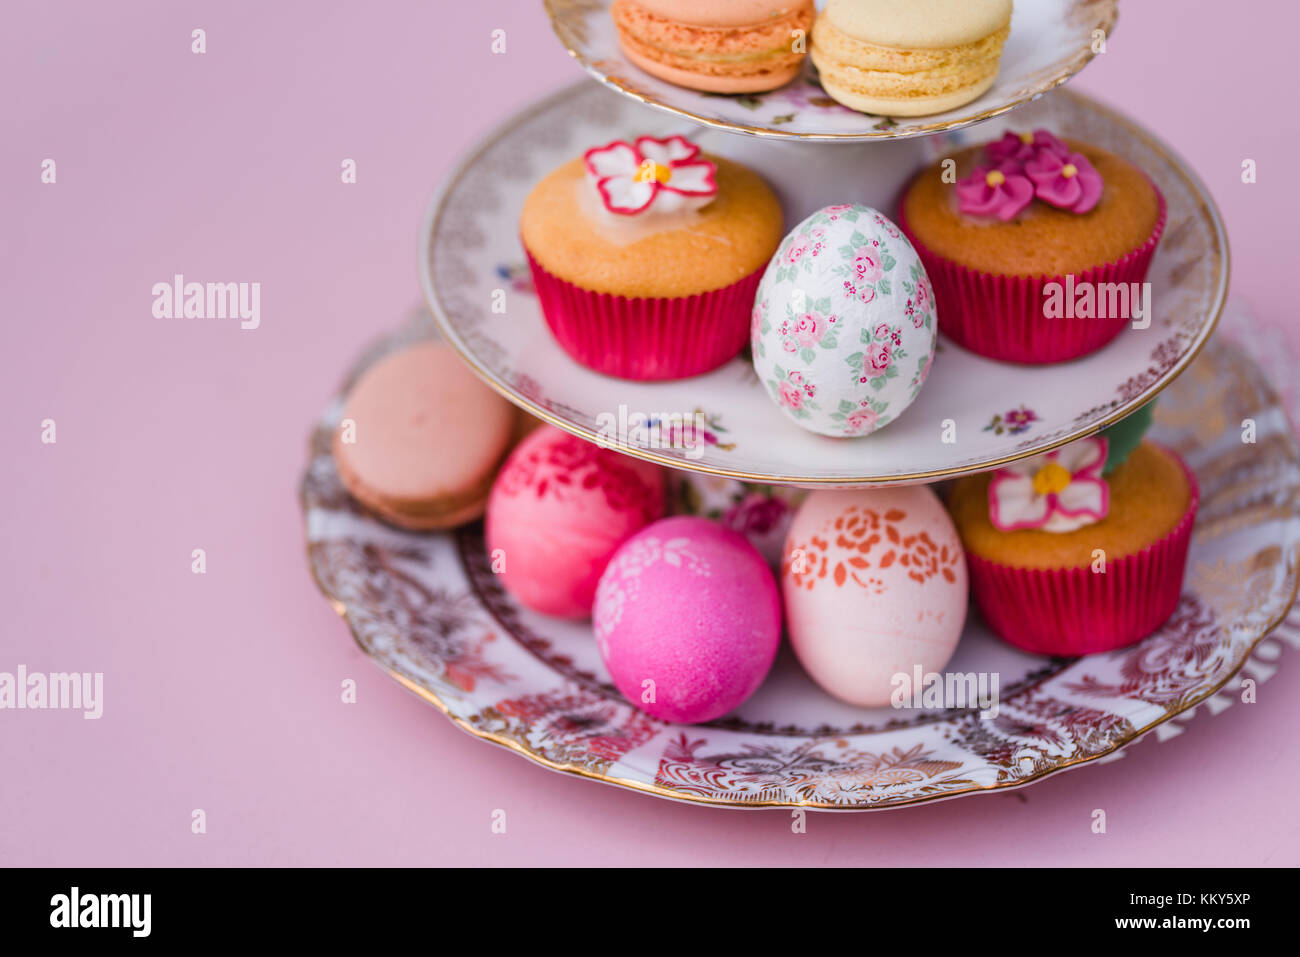 Etagere, muffin, Macarons, Easter eggs, detail, bird's-eye view, Stock Photo